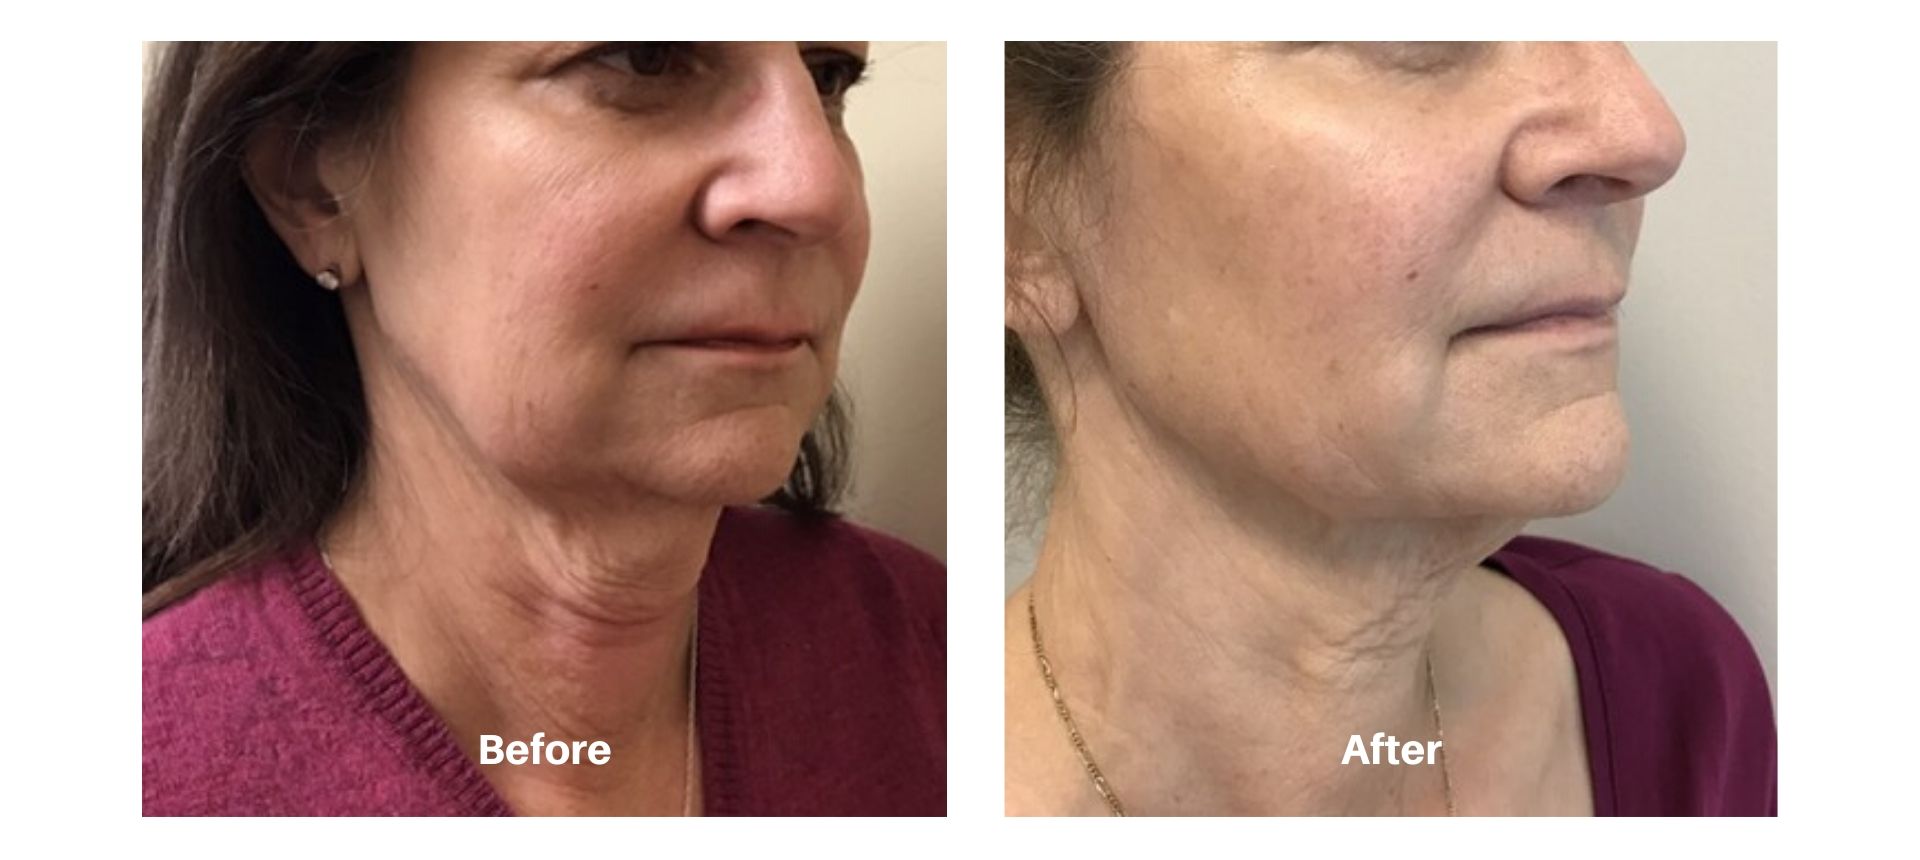 Woman's before and after treatment results from kybella to double chin at Always Beautiful.